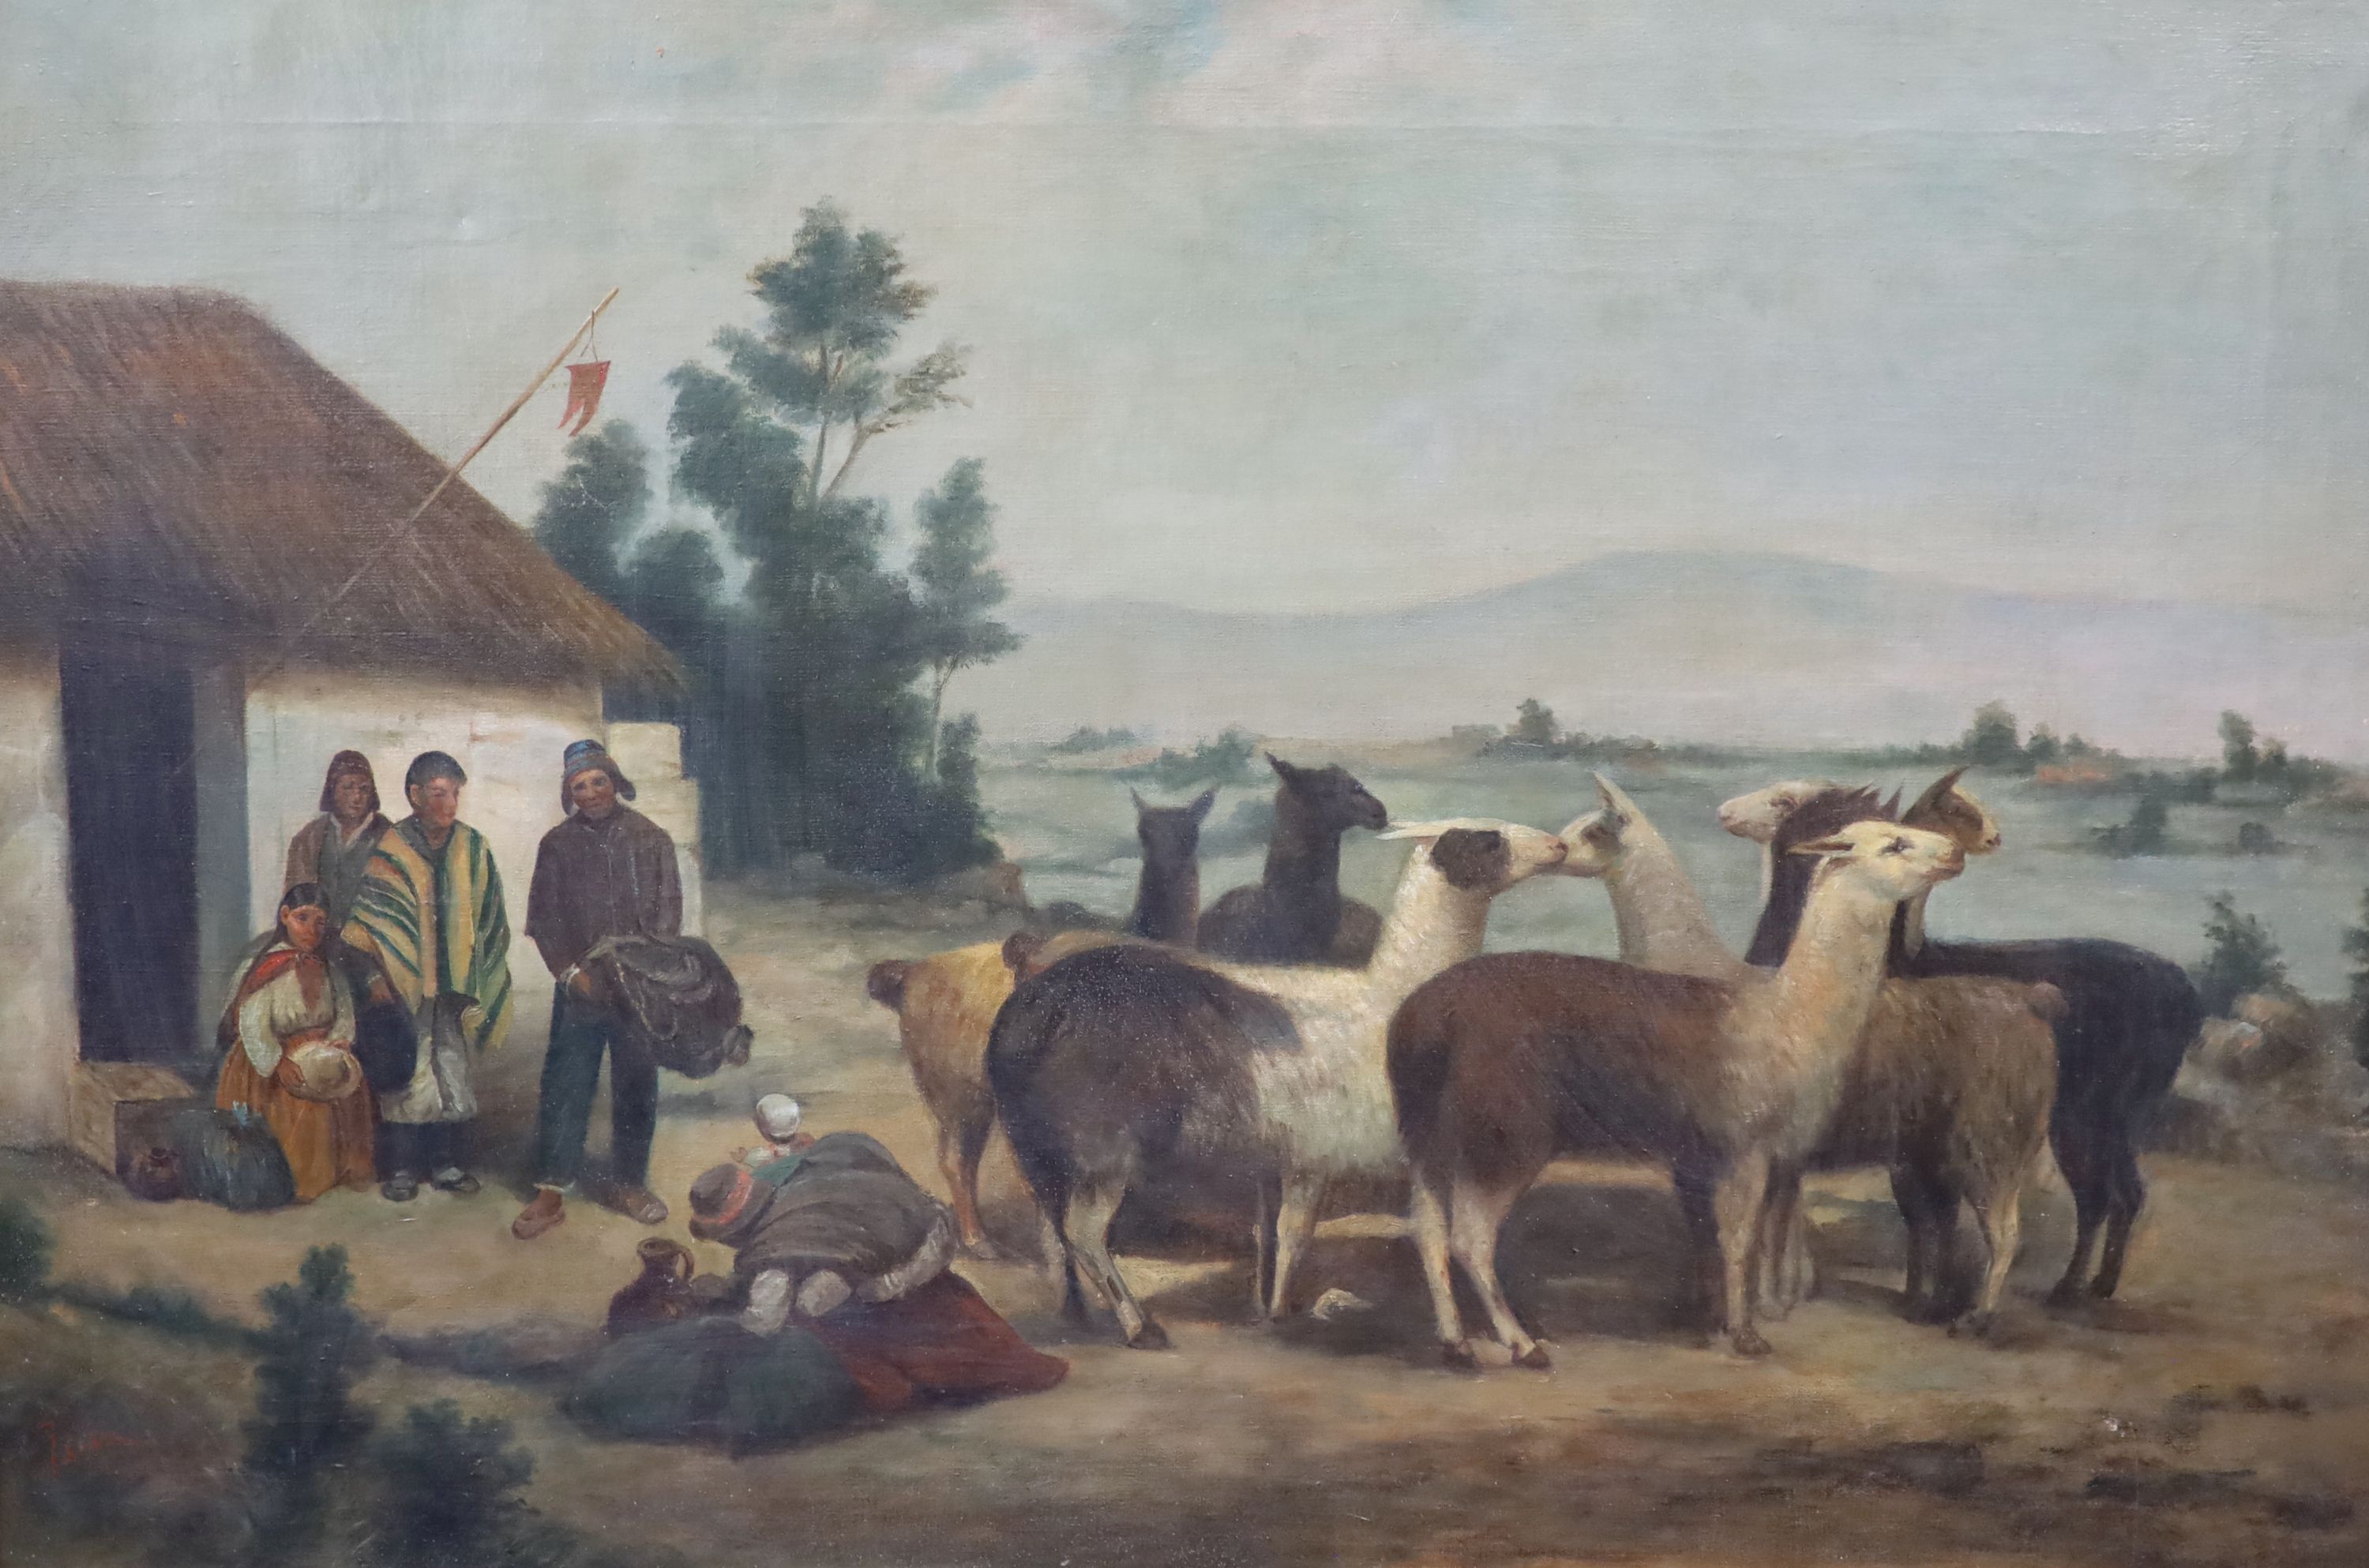 South American School, circa 1900, Peruvian lakeside scene with figures and llamas, Oil on canvas, 59 x 89cm.